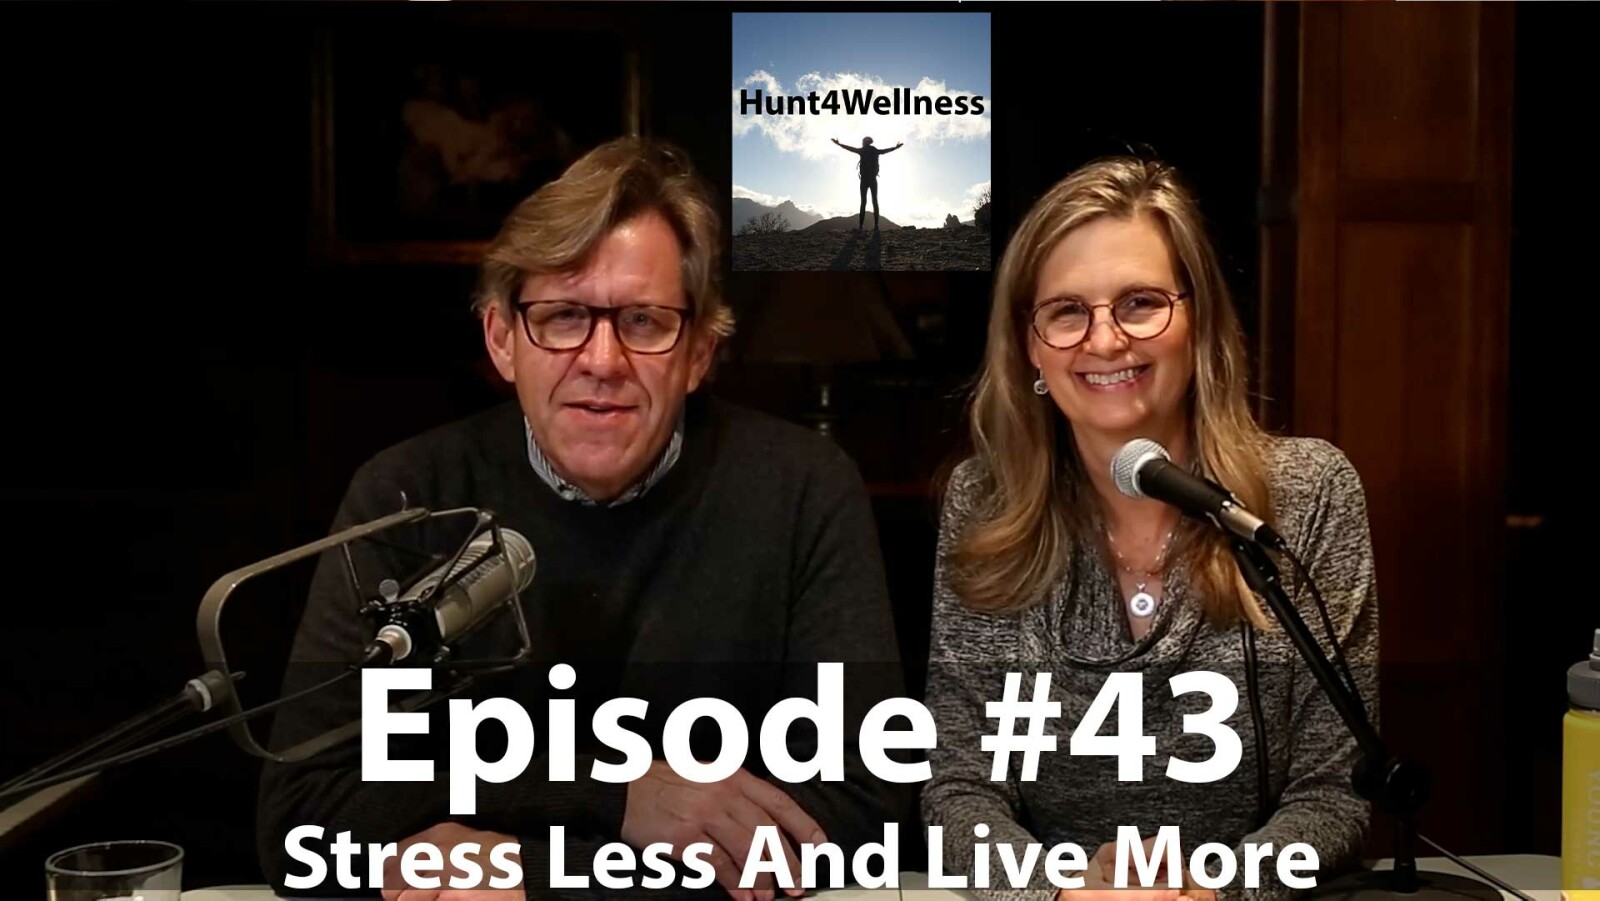 Episode #43 - Stress Less And Live More